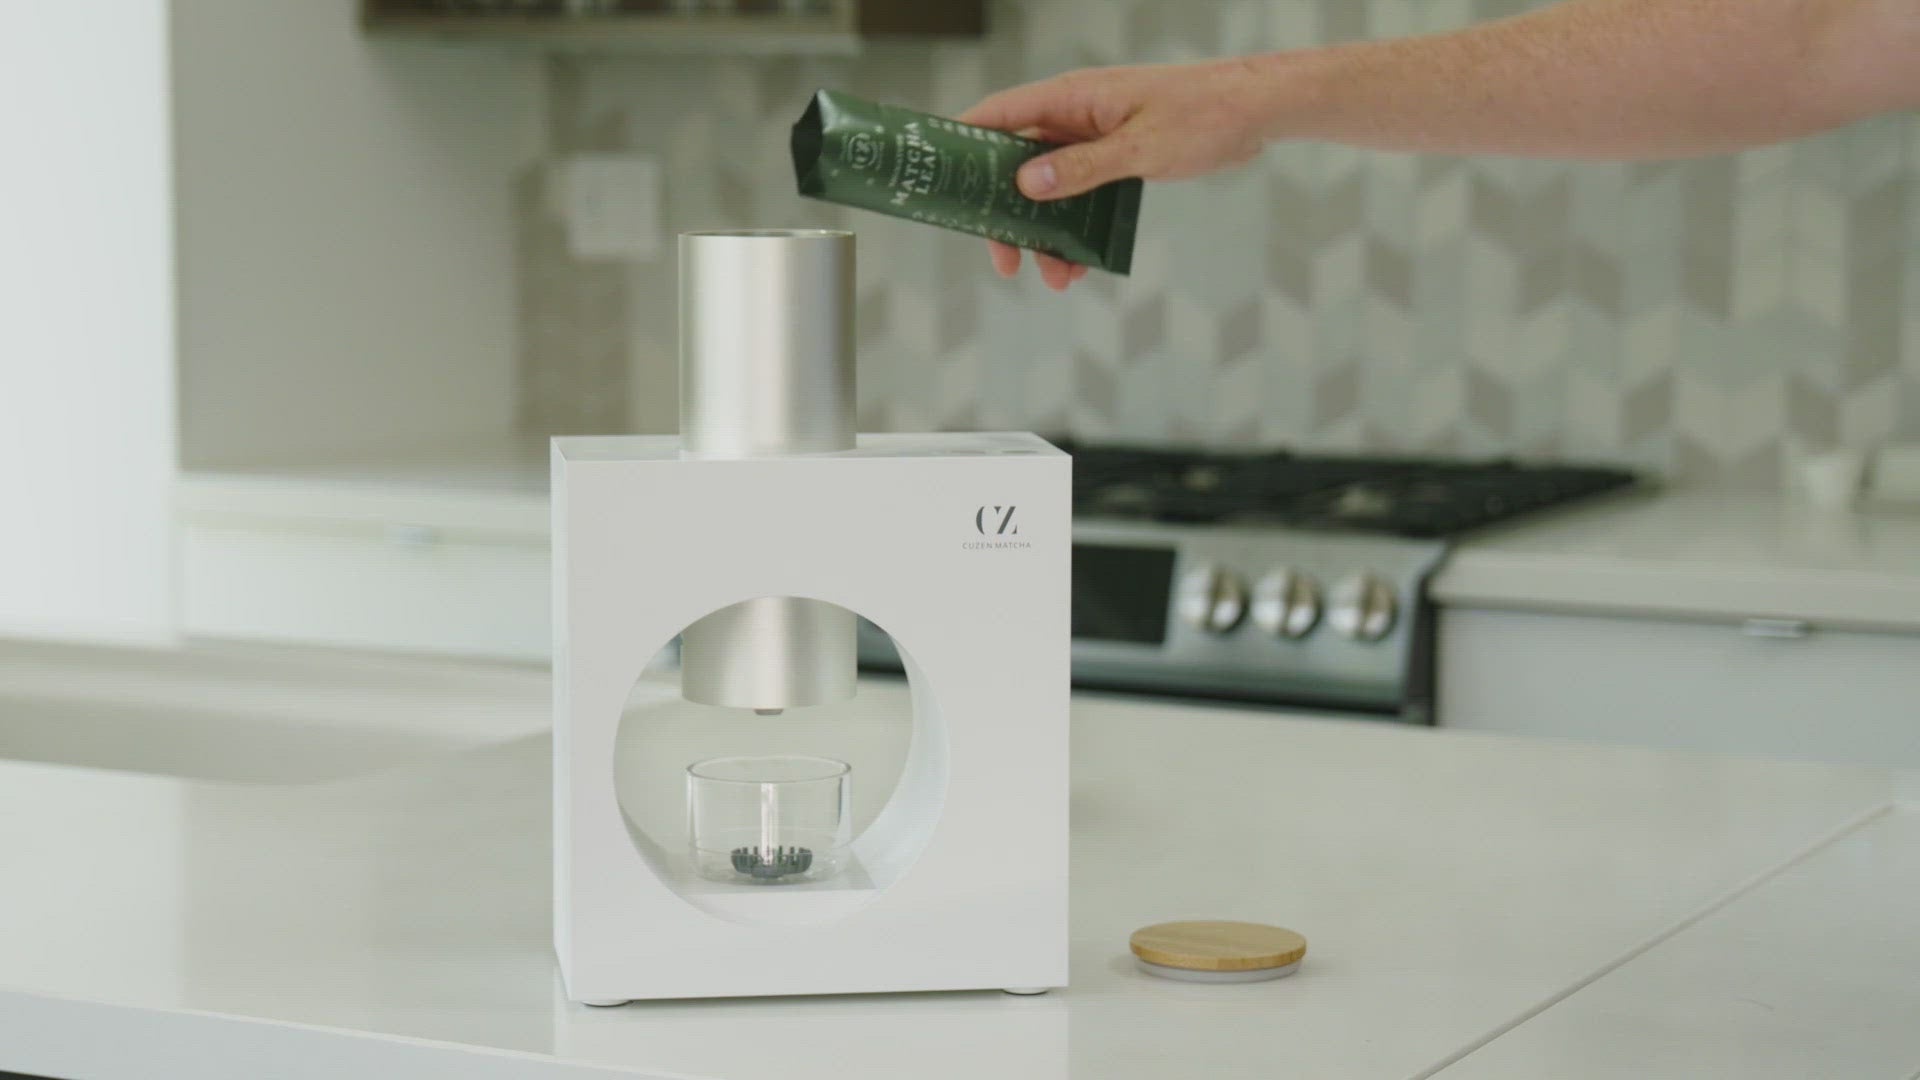 Cuzen Matcha home tea maker lets you easily brew fresh matcha-presso in  an instant